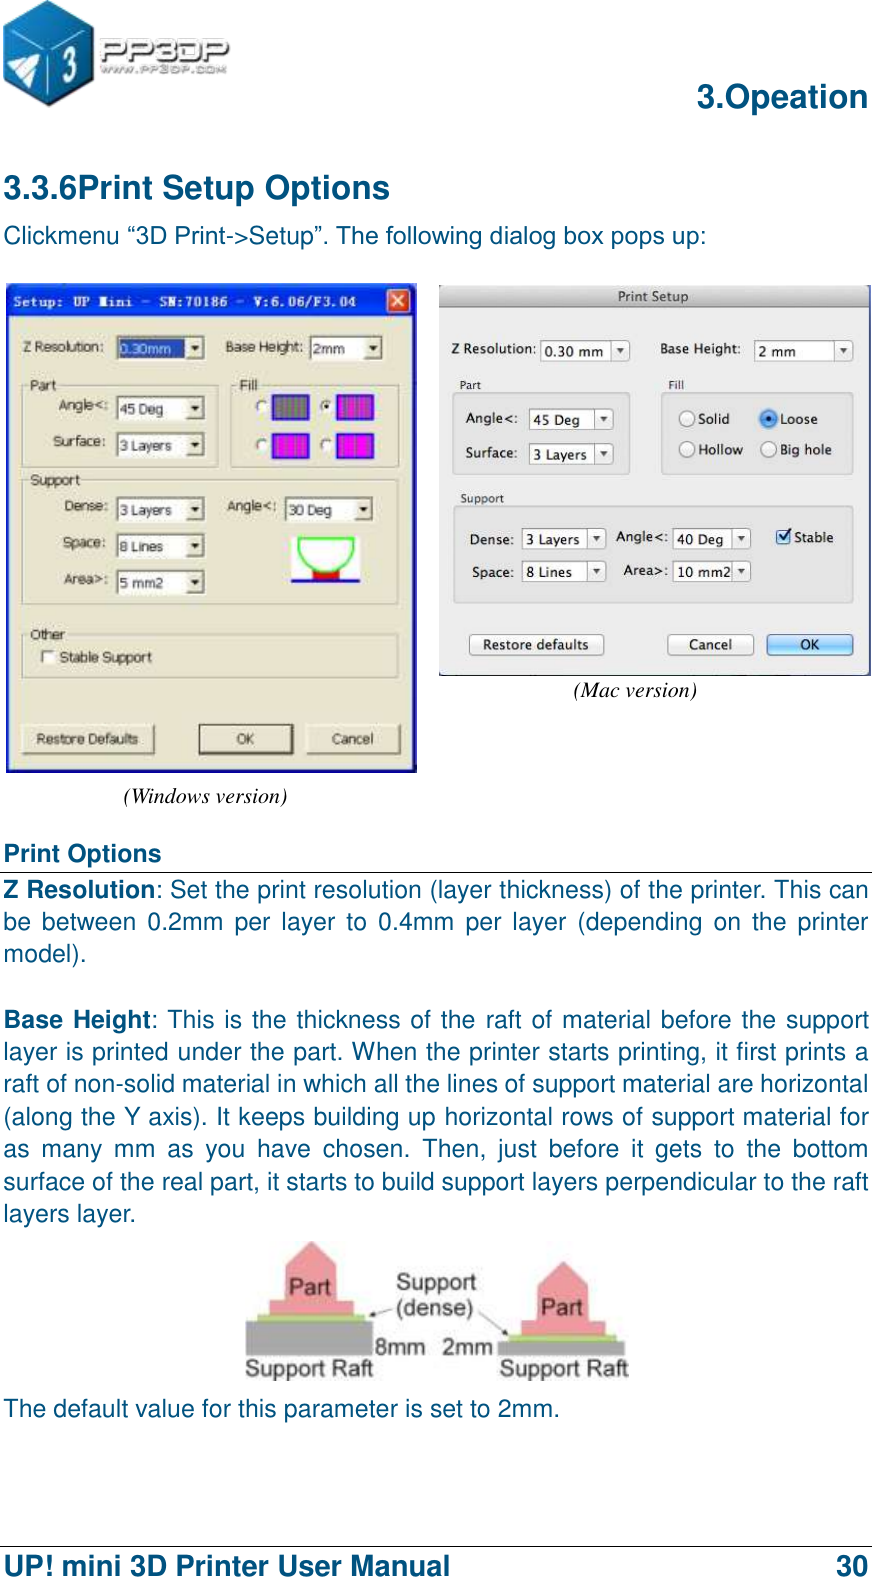      3.Opeation  UP! mini 3D Printer User Manual                                30 3.3.6Print Setup Options Clickmenu “3D Print-&gt;Setup”. The following dialog box pops up:    Print Options Z Resolution: Set the print resolution (layer thickness) of the printer. This can be  between 0.2mm  per layer  to 0.4mm  per  layer  (depending  on the  printer model).  Base Height: This is the thickness of the raft of material before the support layer is printed under the part. When the printer starts printing, it first prints a raft of non-solid material in which all the lines of support material are horizontal (along the Y axis). It keeps building up horizontal rows of support material for as  many  mm  as  you  have  chosen.  Then,  just  before  it  gets  to  the  bottom surface of the real part, it starts to build support layers perpendicular to the raft layers layer.  The default value for this parameter is set to 2mm.    (Mac version) (Windows version) 